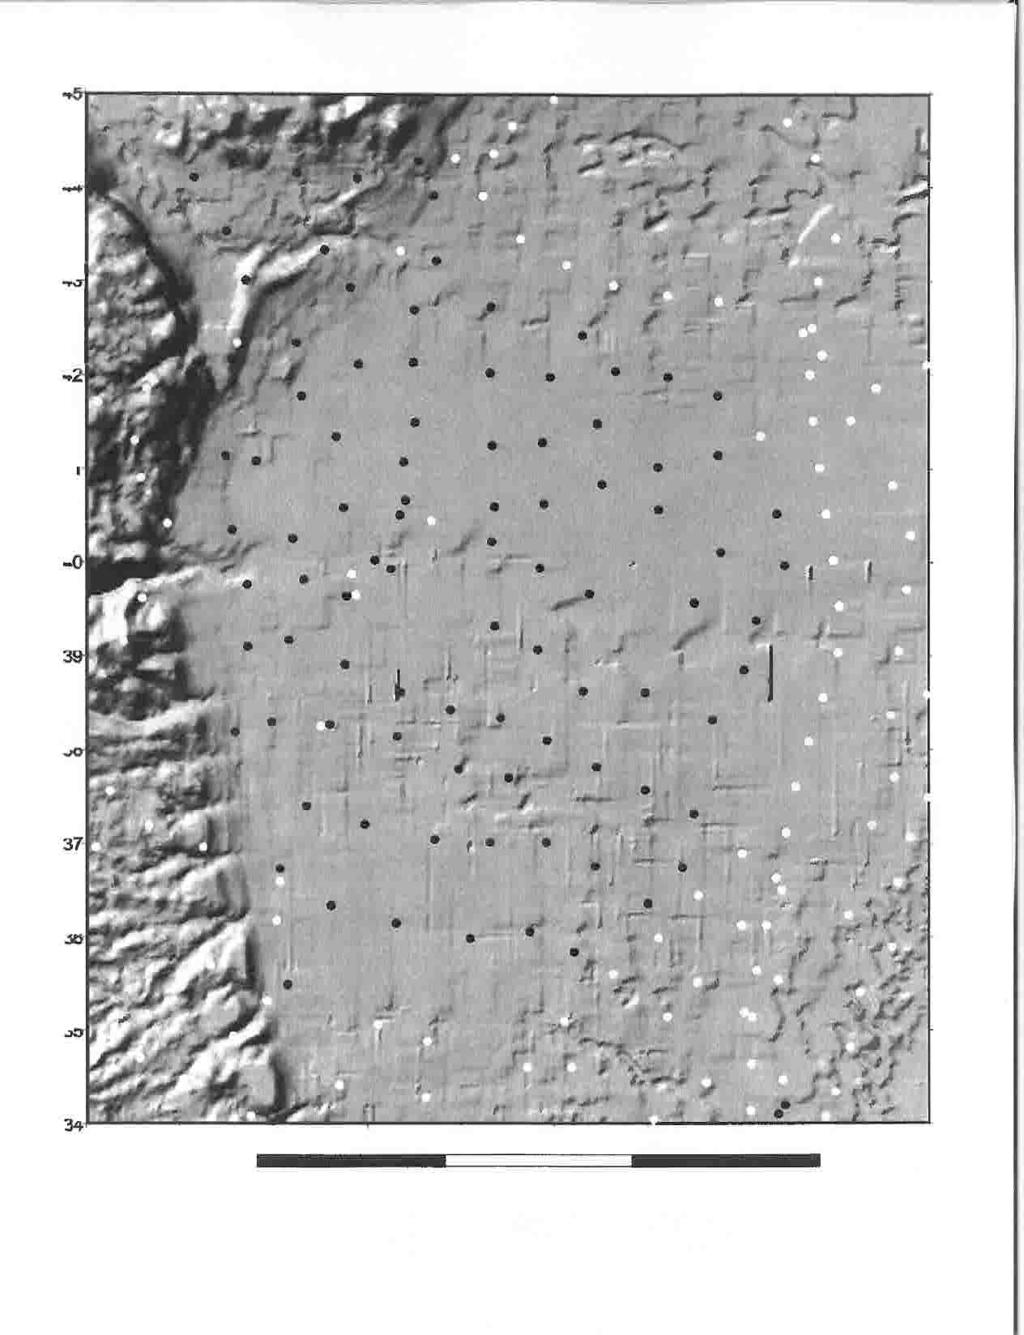 Fig. 2 Gravity coverage map of the Jericho area superimposed on the shadow